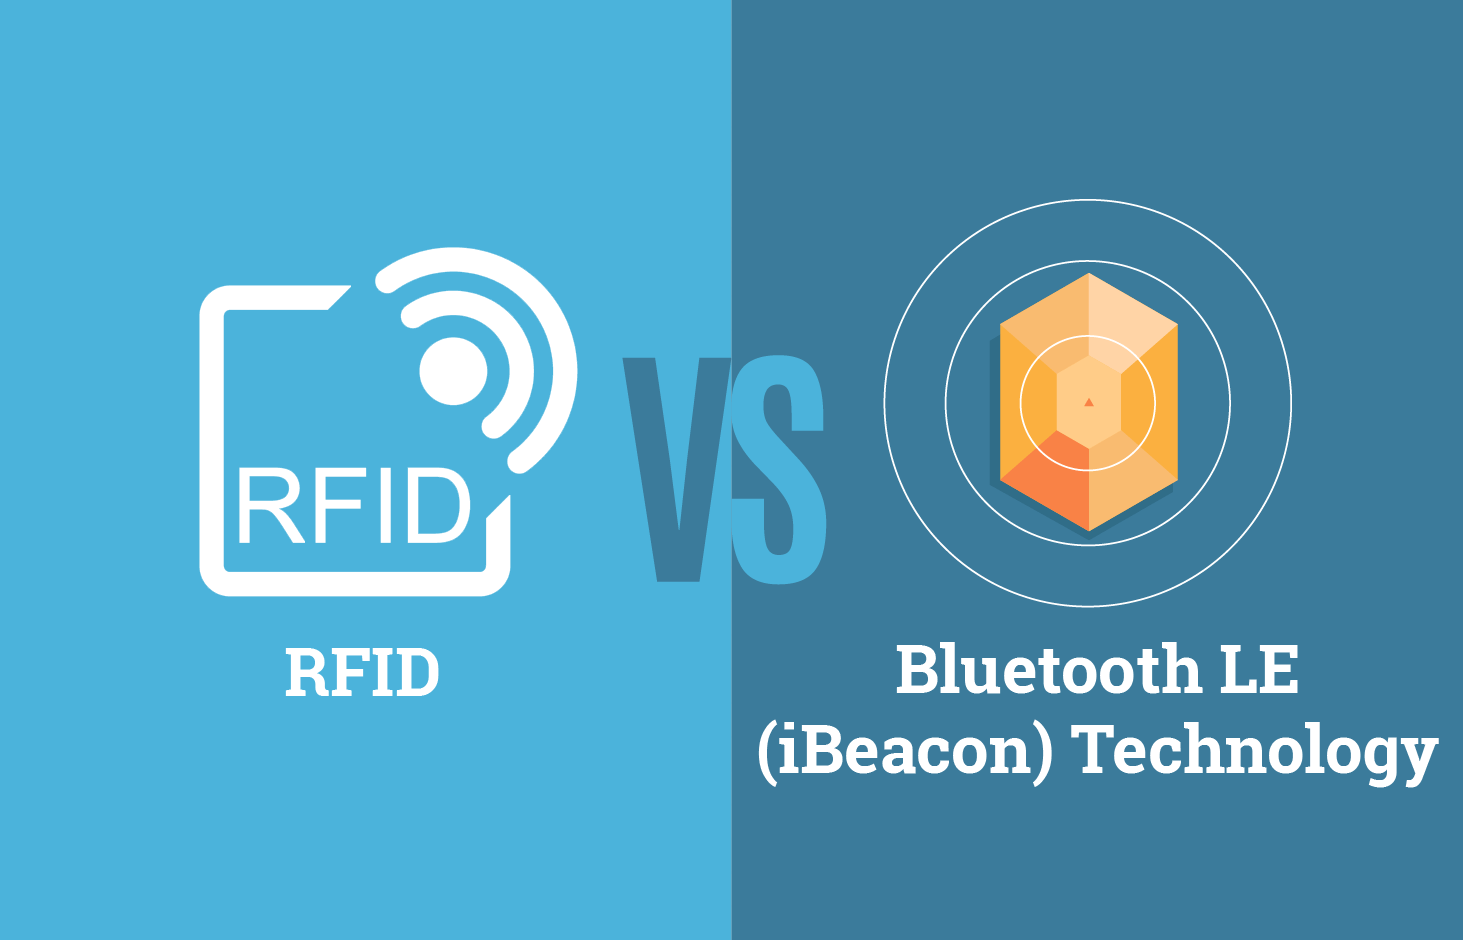 What to prefer RFID or Beacon?